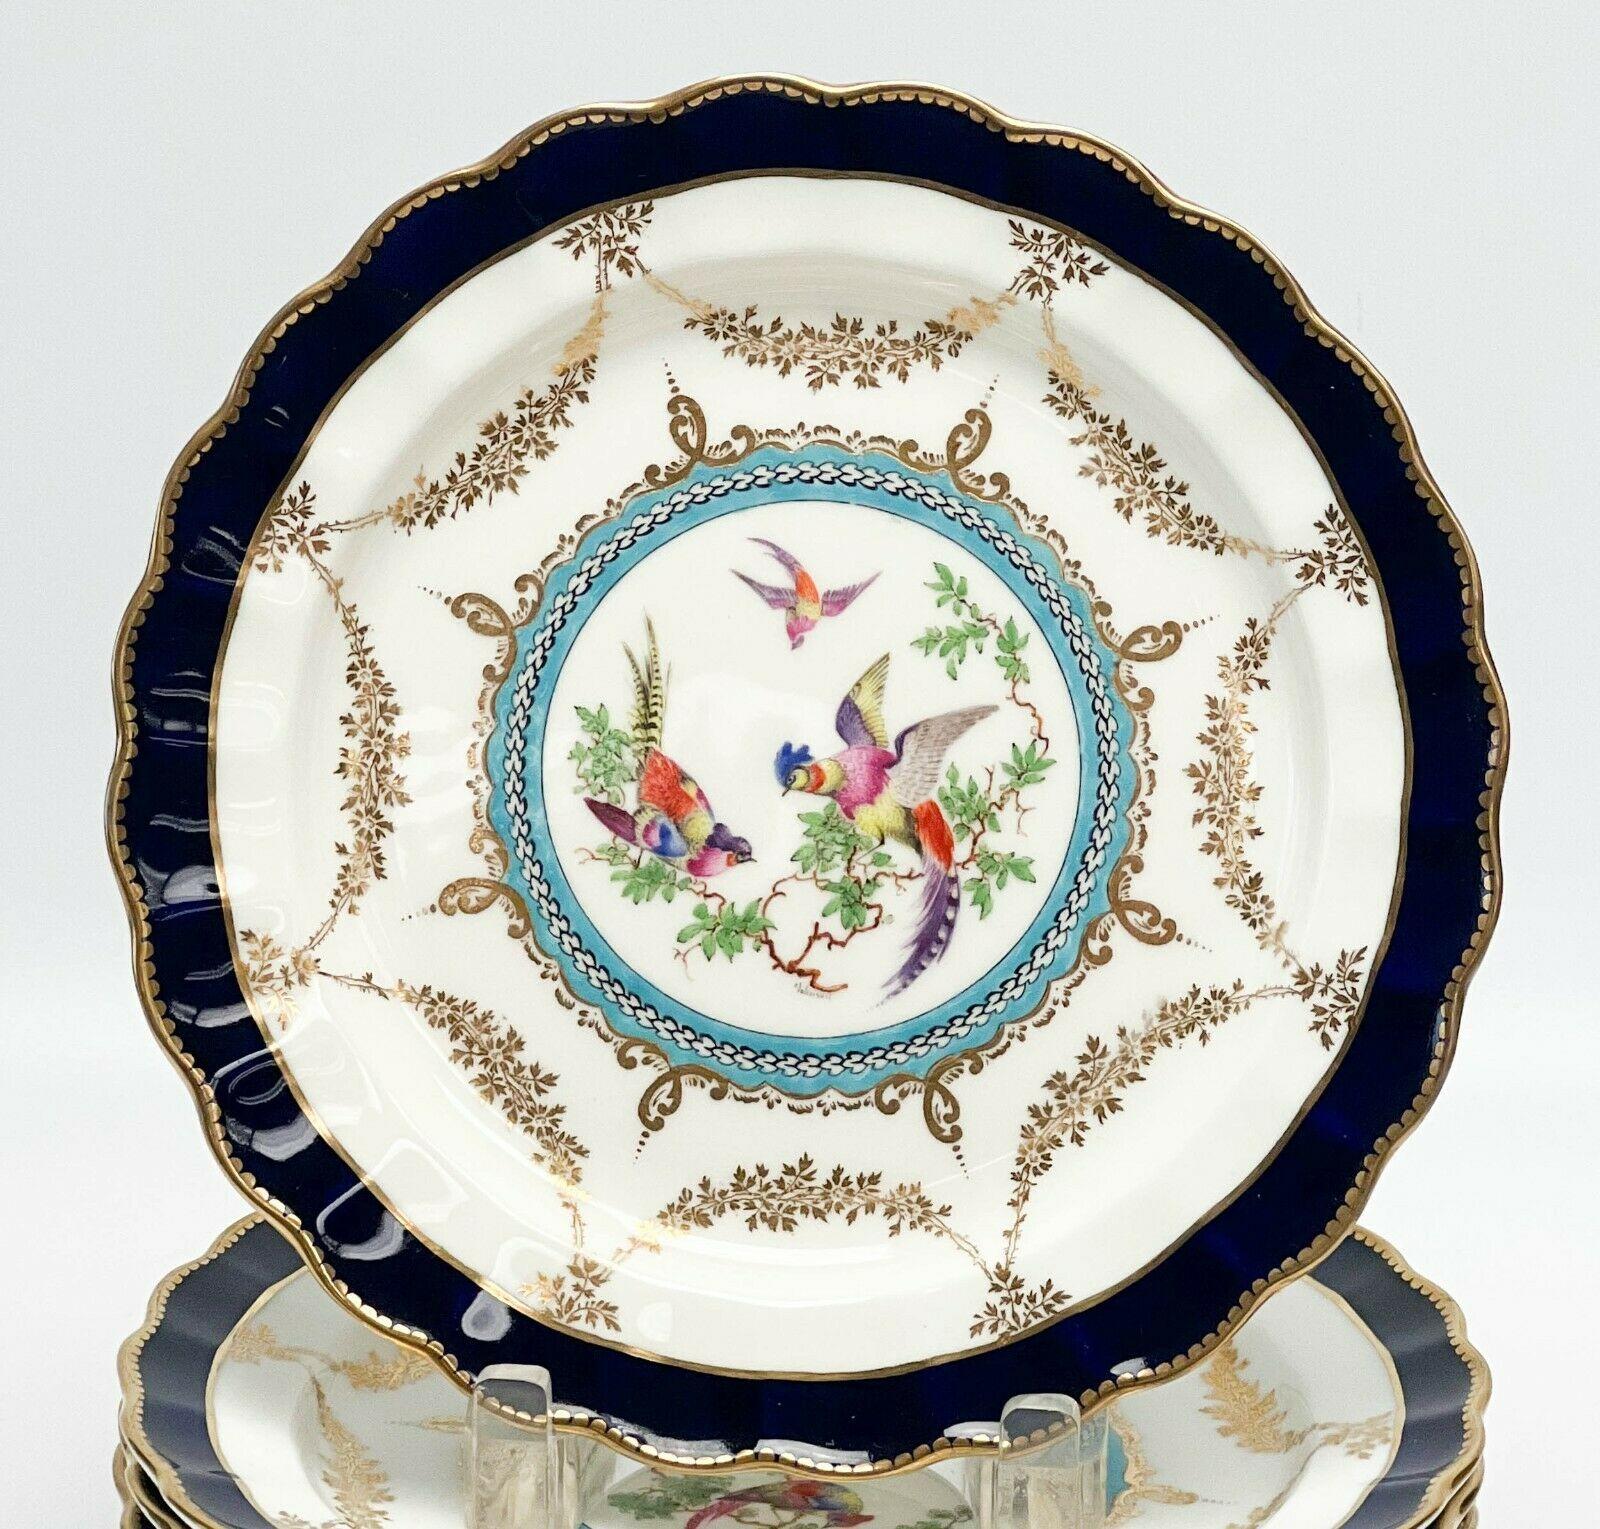 9 Royal Worcester for Tiffany & Co. porcelain dessert plates artist signed, 1925

A white ground with a band of cobalt blue to the scalloped edge. Gilt garland decoration, hand painted birds to the center, artist signed 